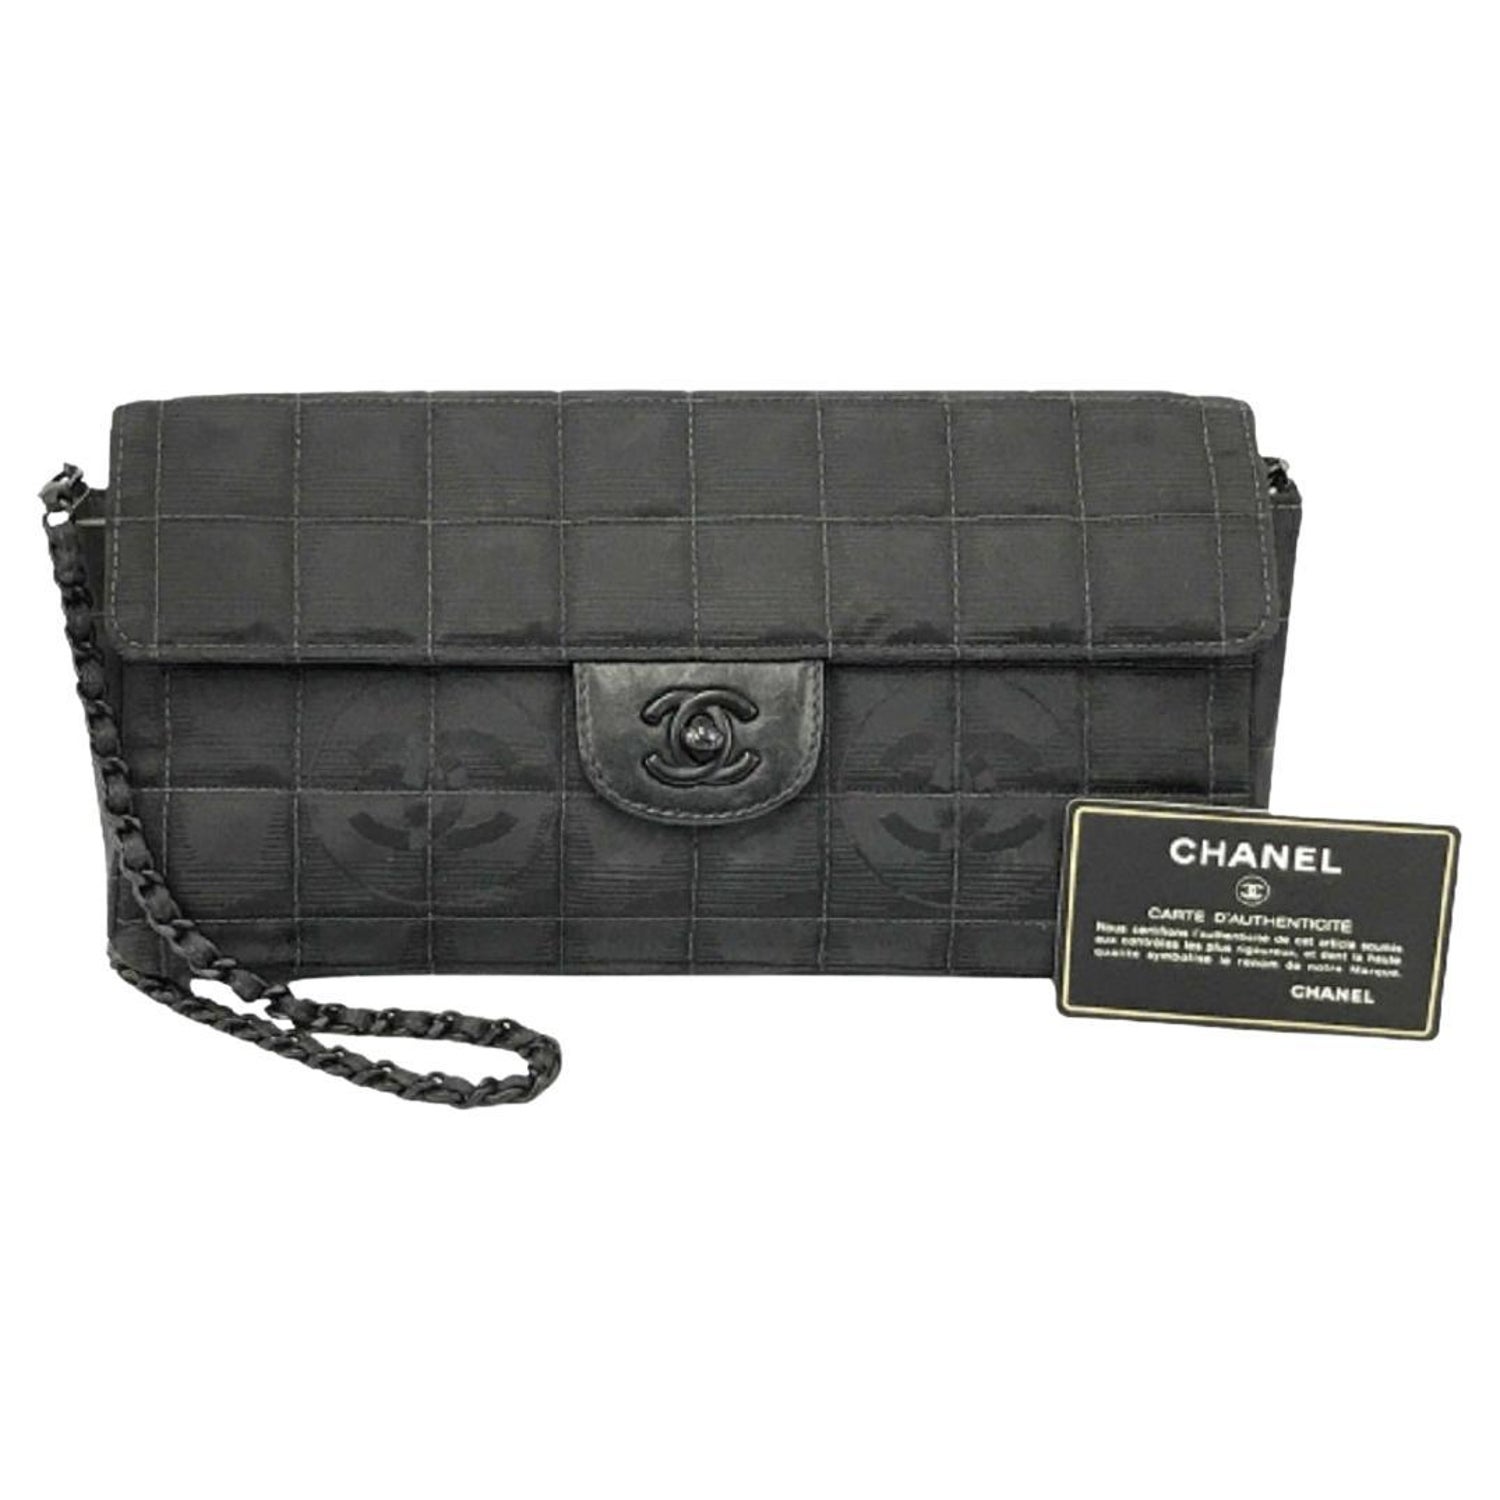 Limited Edition Chanel Classic Shoulder Flap Bag in Black Calf Leather, GHW